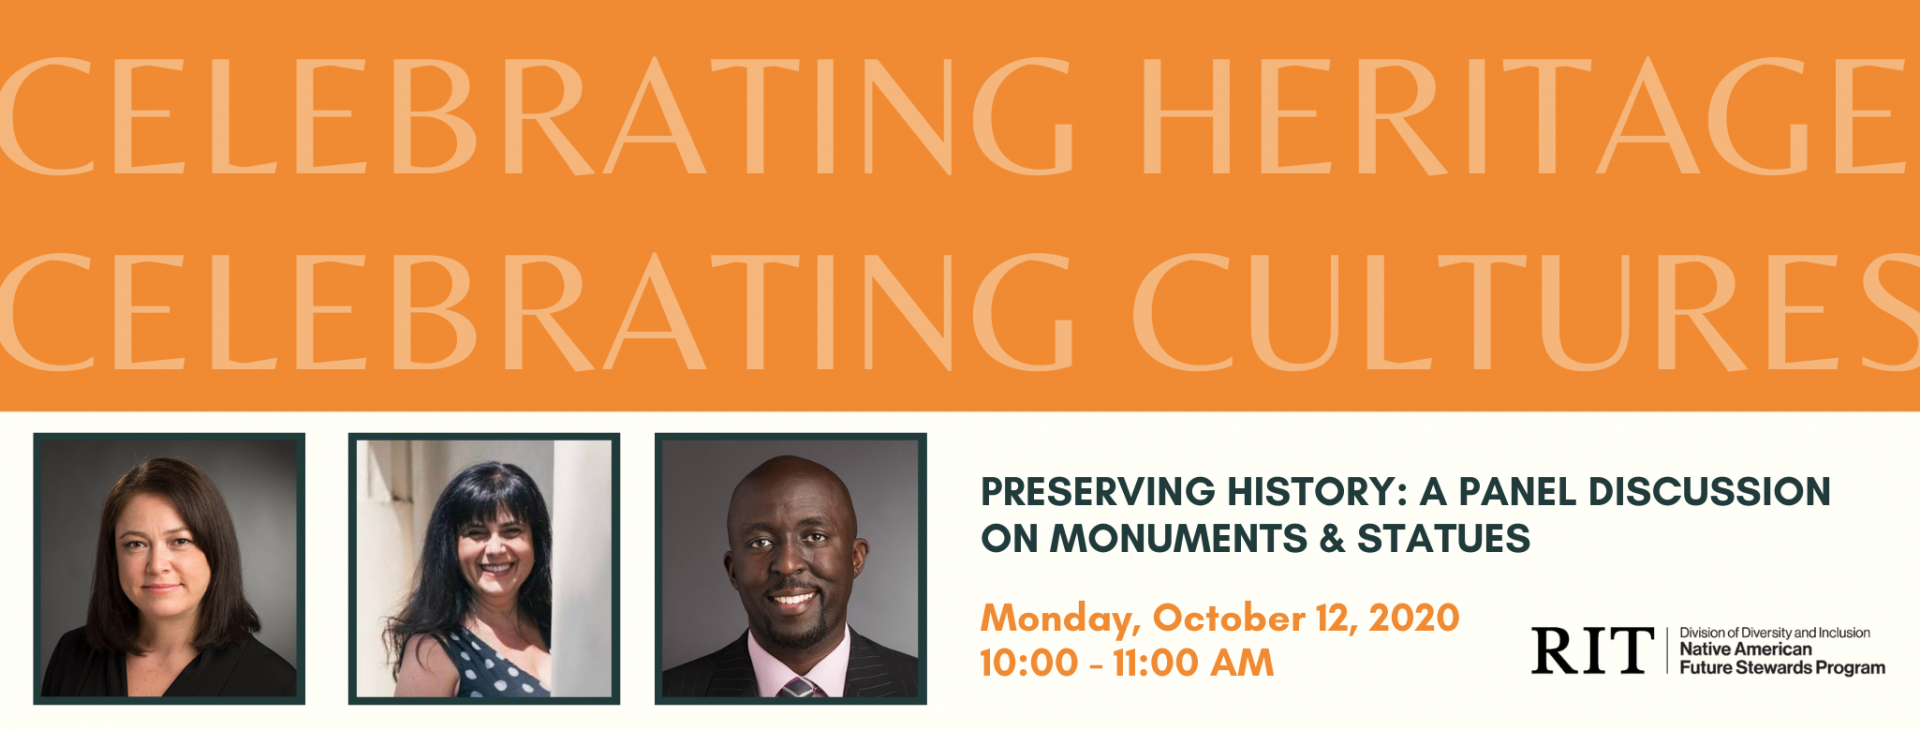 Rectangle image split in half. The top half is orange with the words "Celebrating Heritage, Celebrating Cultures" written. The bottom half has a light white background with three square photographs aligned in a row to the left corner. The bottom right corner contains meeting title, time, and the RIT Future Stewards Program's lockup